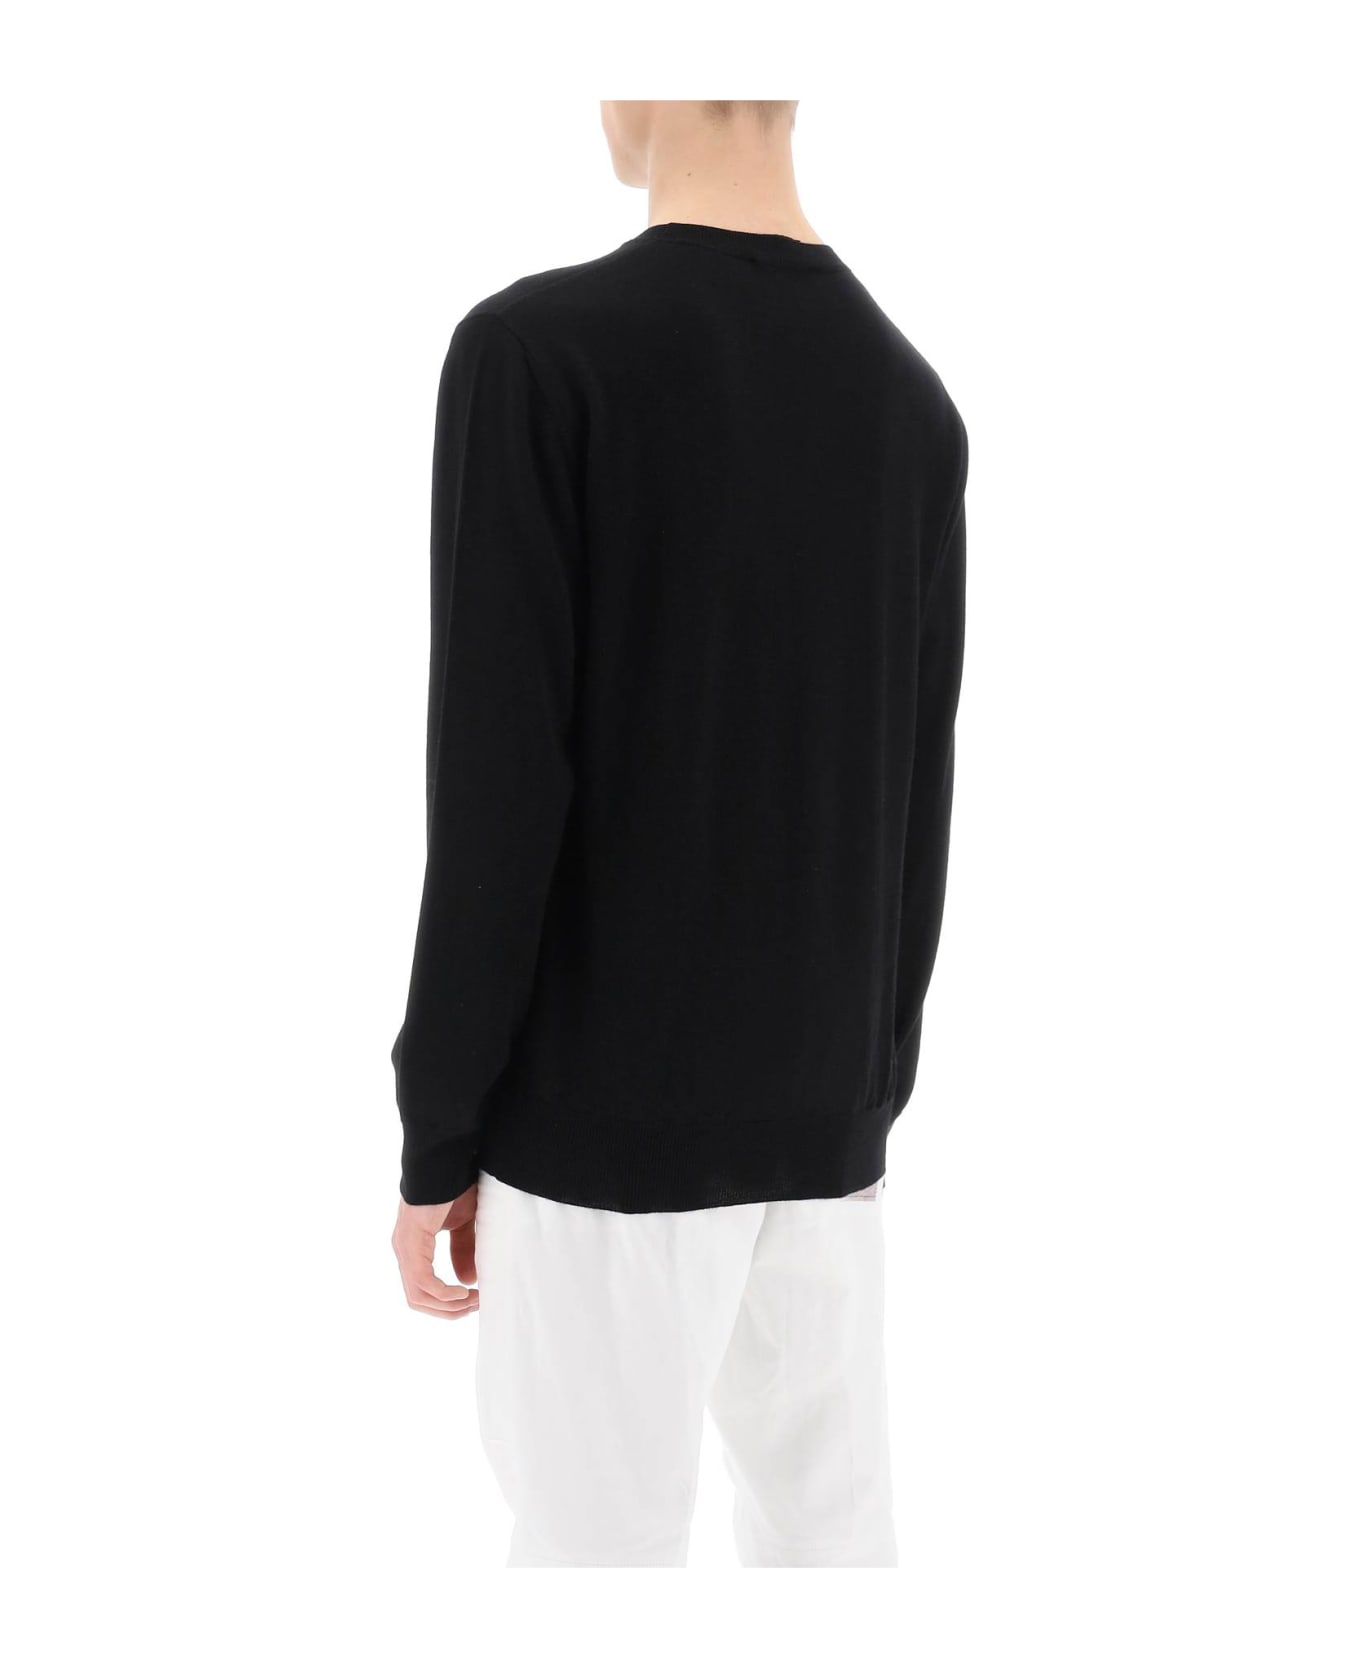 Dsquared2 Textured Logo Sweater - 961